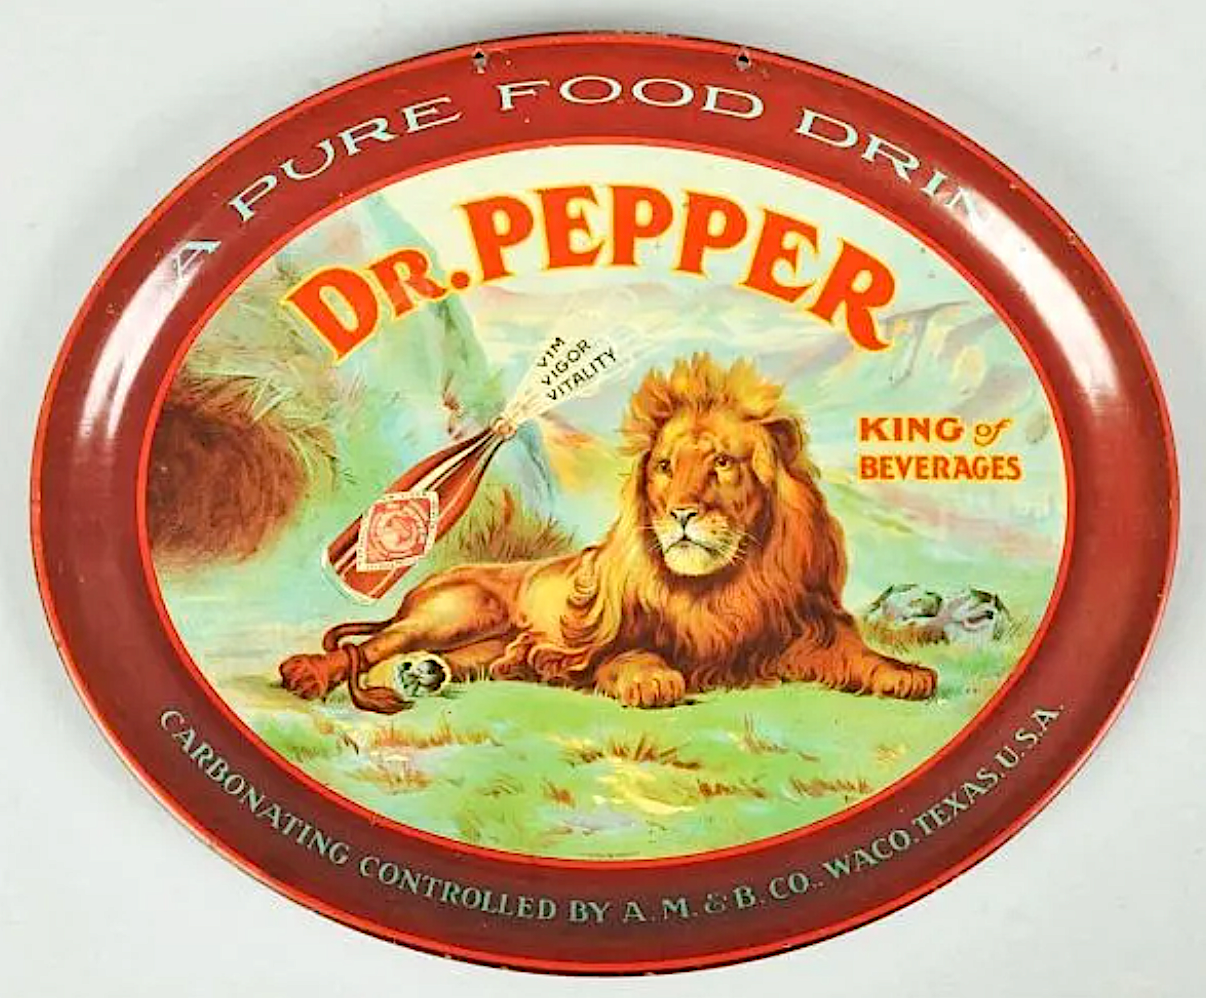 A circa-1905 Dr Pepper tray featuring a lion and the “King of beverages” slogan realized $11,500 plus the buyer’s premium in December 2011. Image courtesy of Dan Morphy Auctions and LiveAuctioneers.